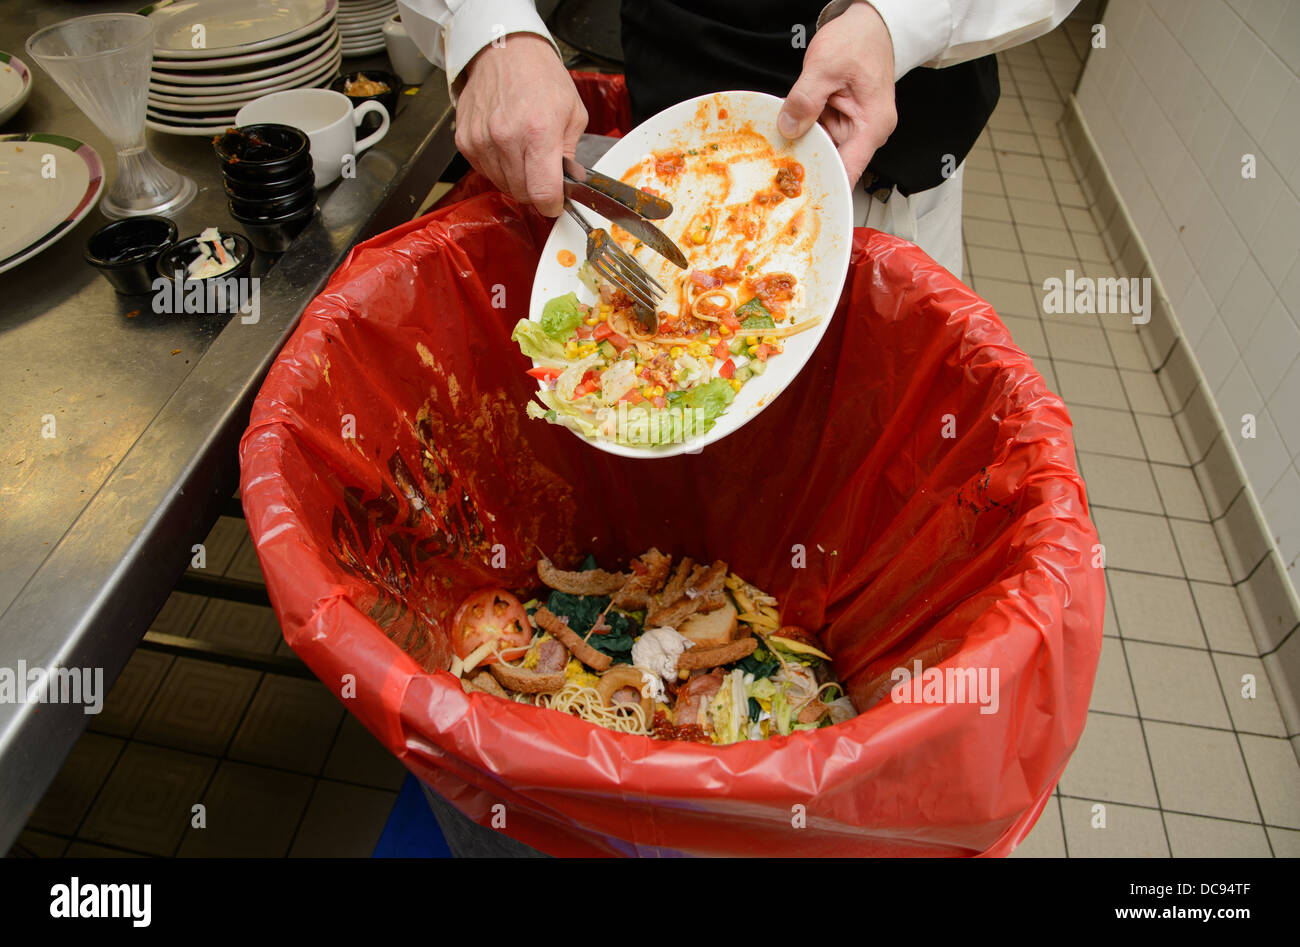 Waste food being collected for recycling at a restaurant in Birmingham ...